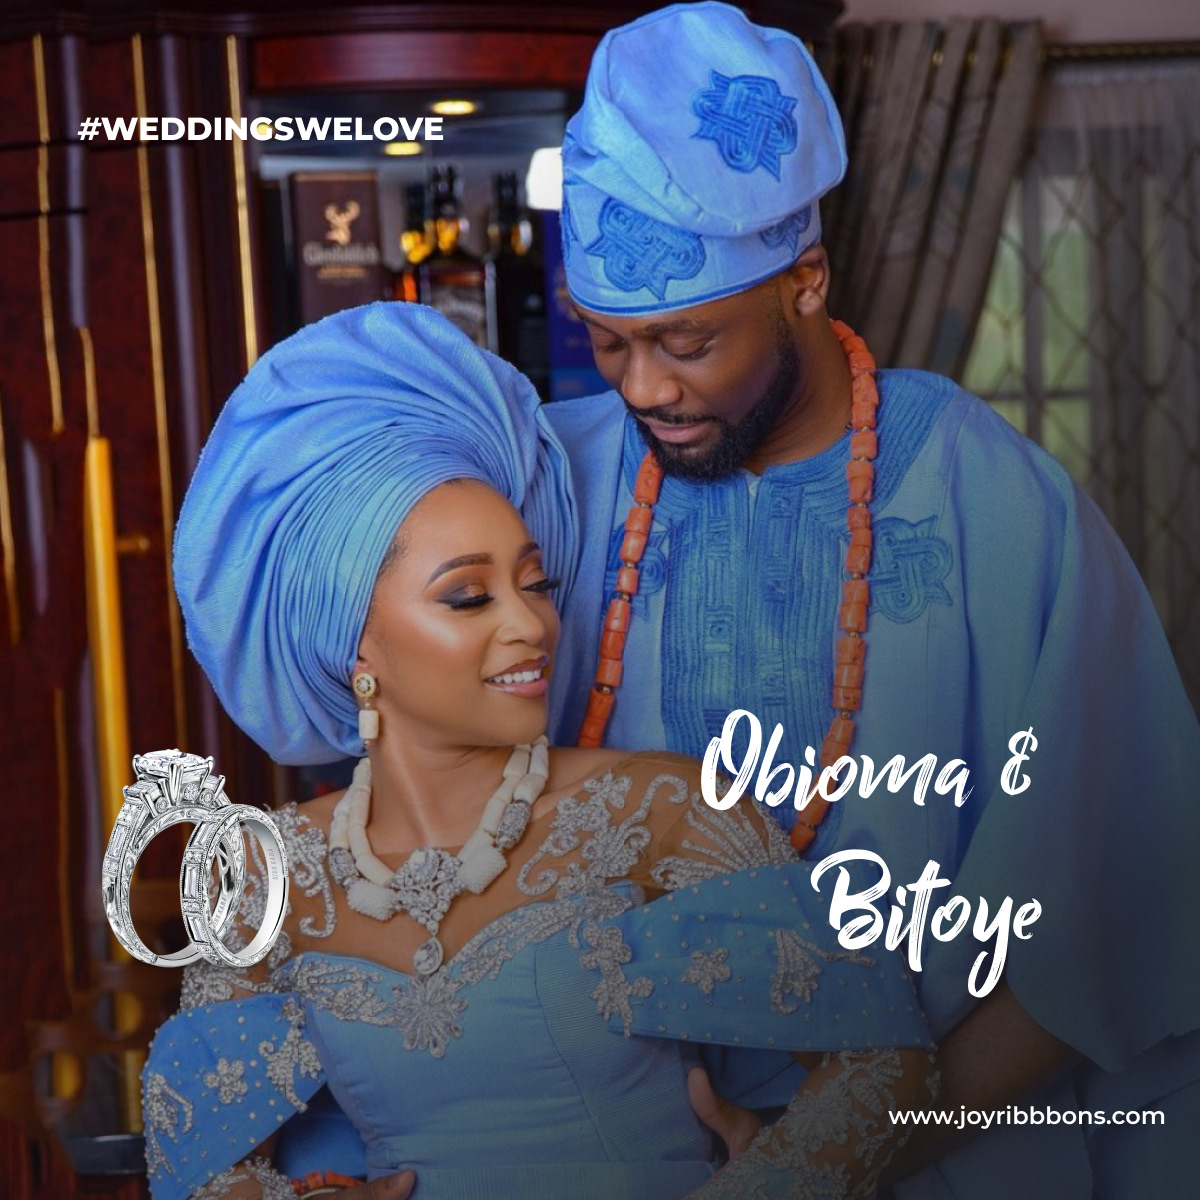 JoyRibbons is the home of all things weddings in Nigeria. We provide an easy-to-use wedding and gift registry
        for about to wed couples. Enjoy some of the Weddings We Love at JoyRibbons with these series